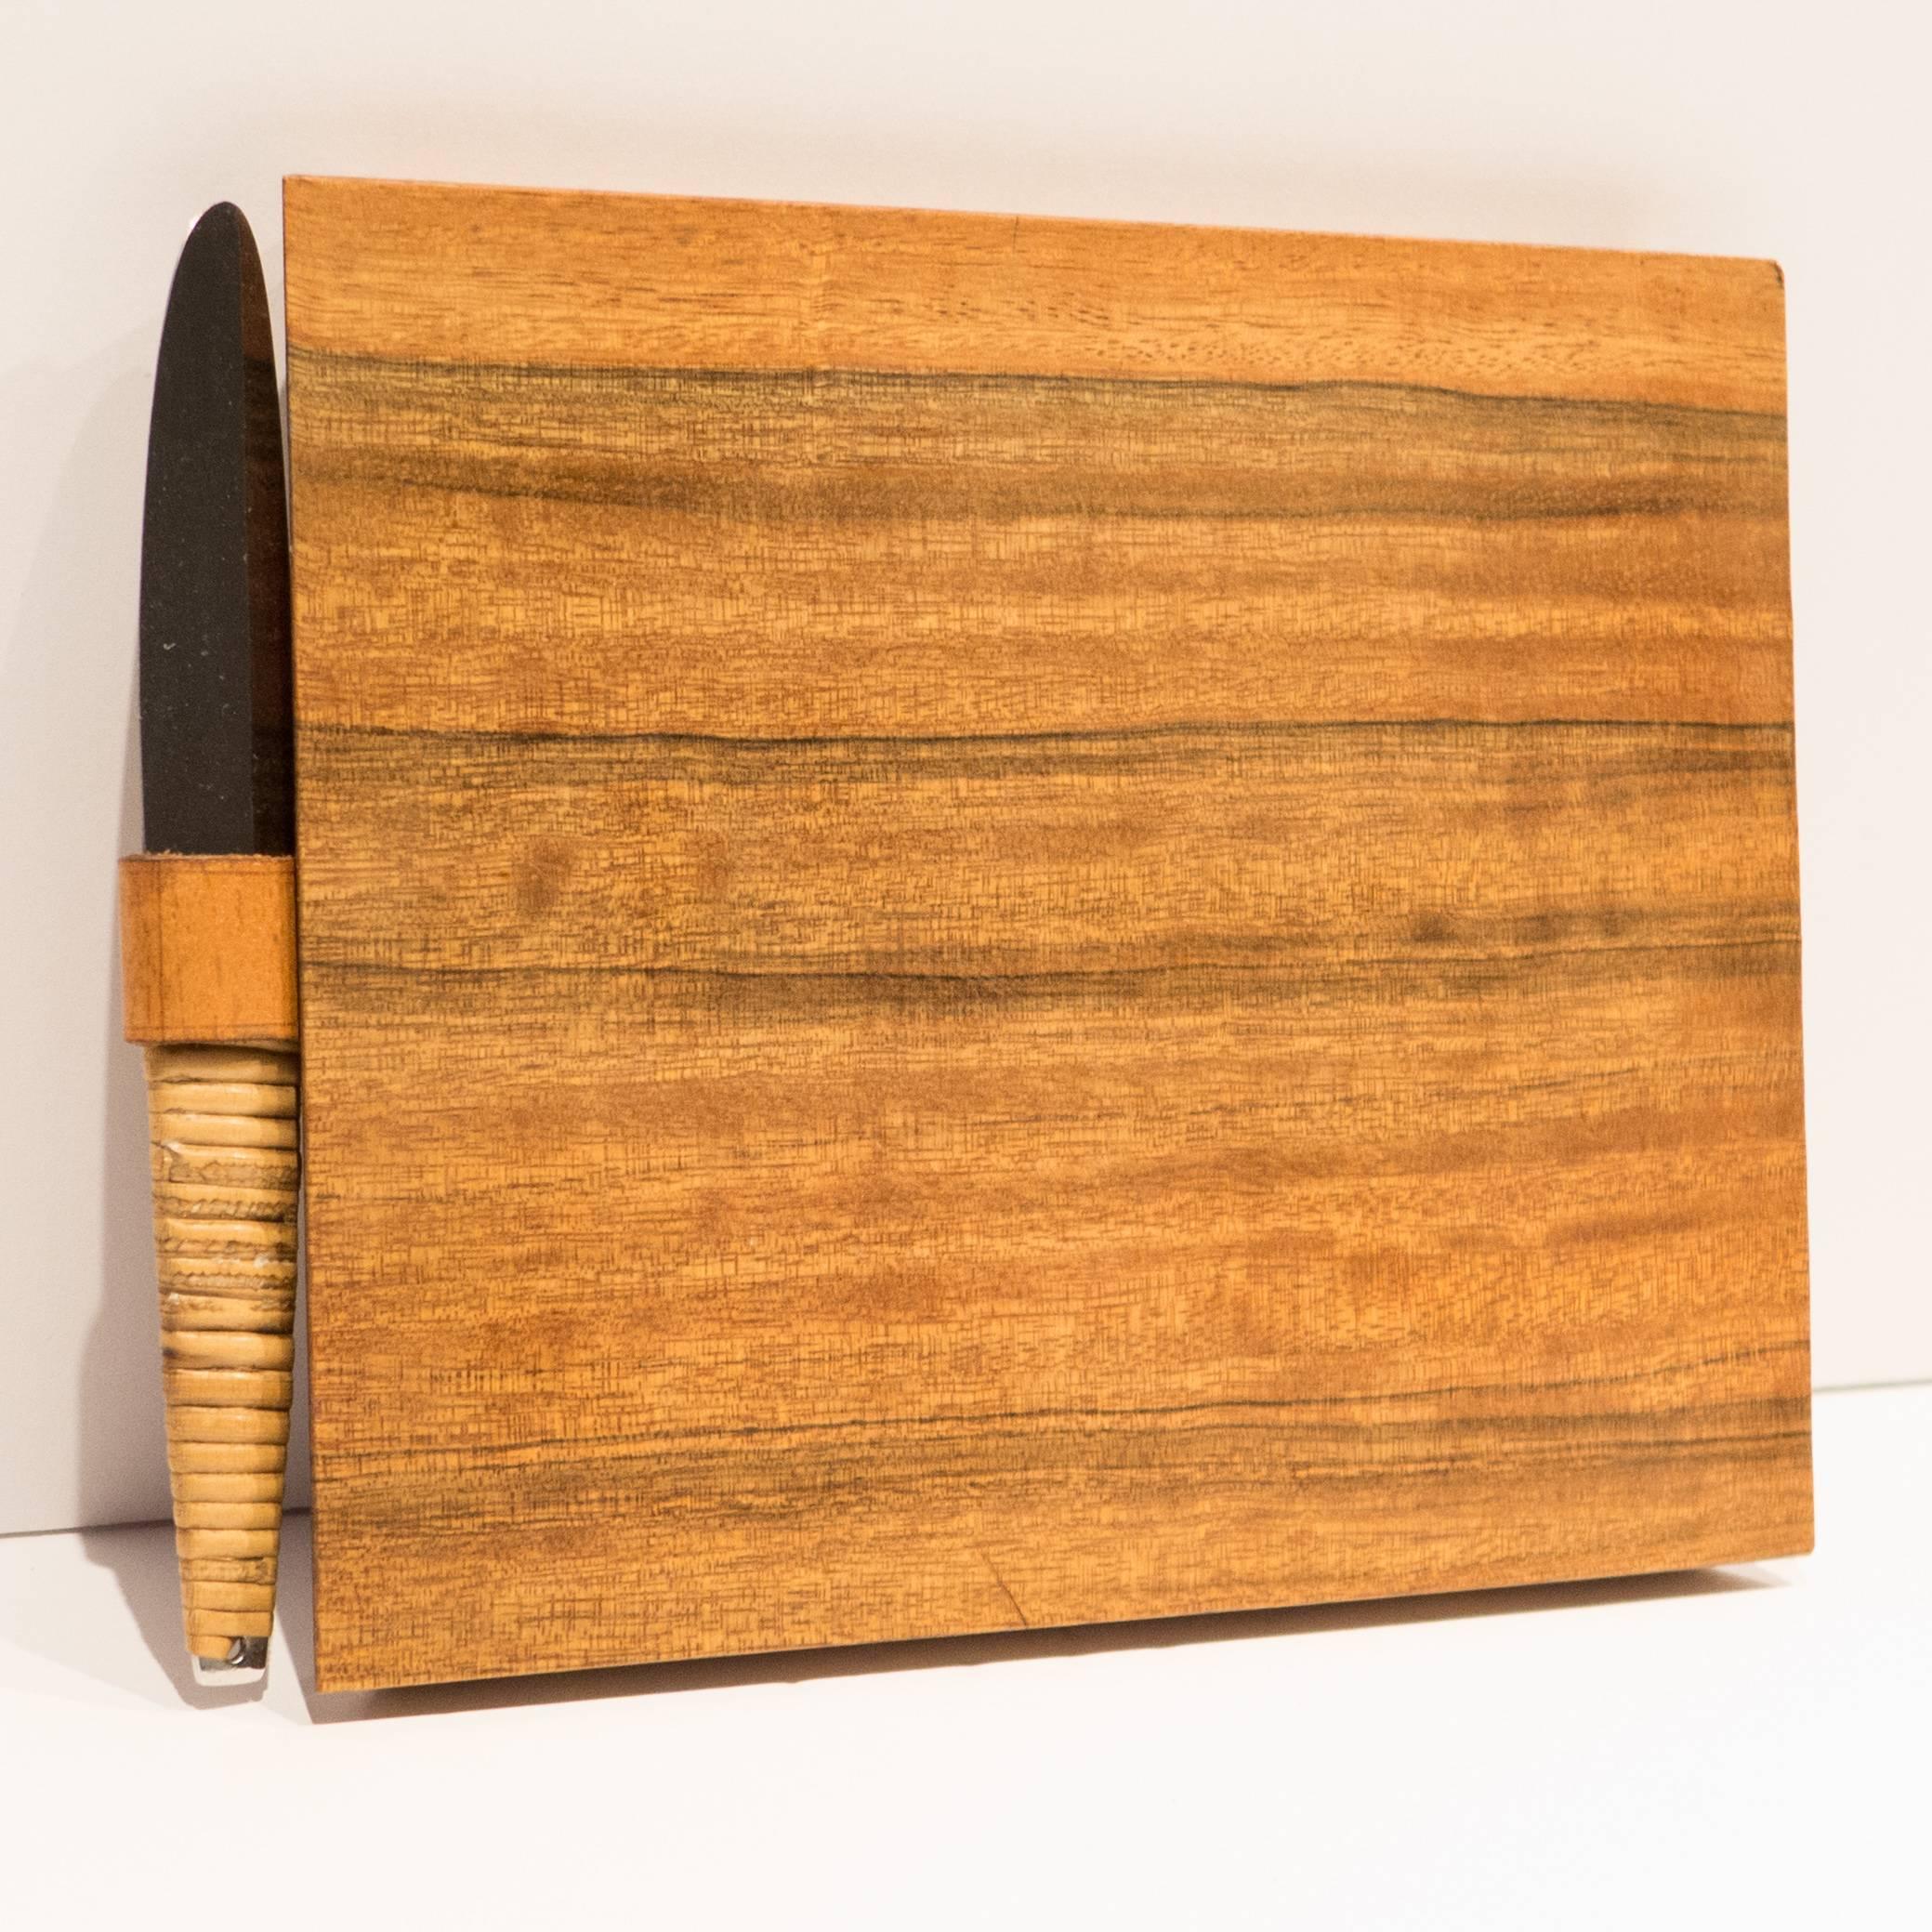 Wooden cutting board in a trapezoidal shape with a leather loop holding a cane-wrapped stainless steel knife. The knife is marked 